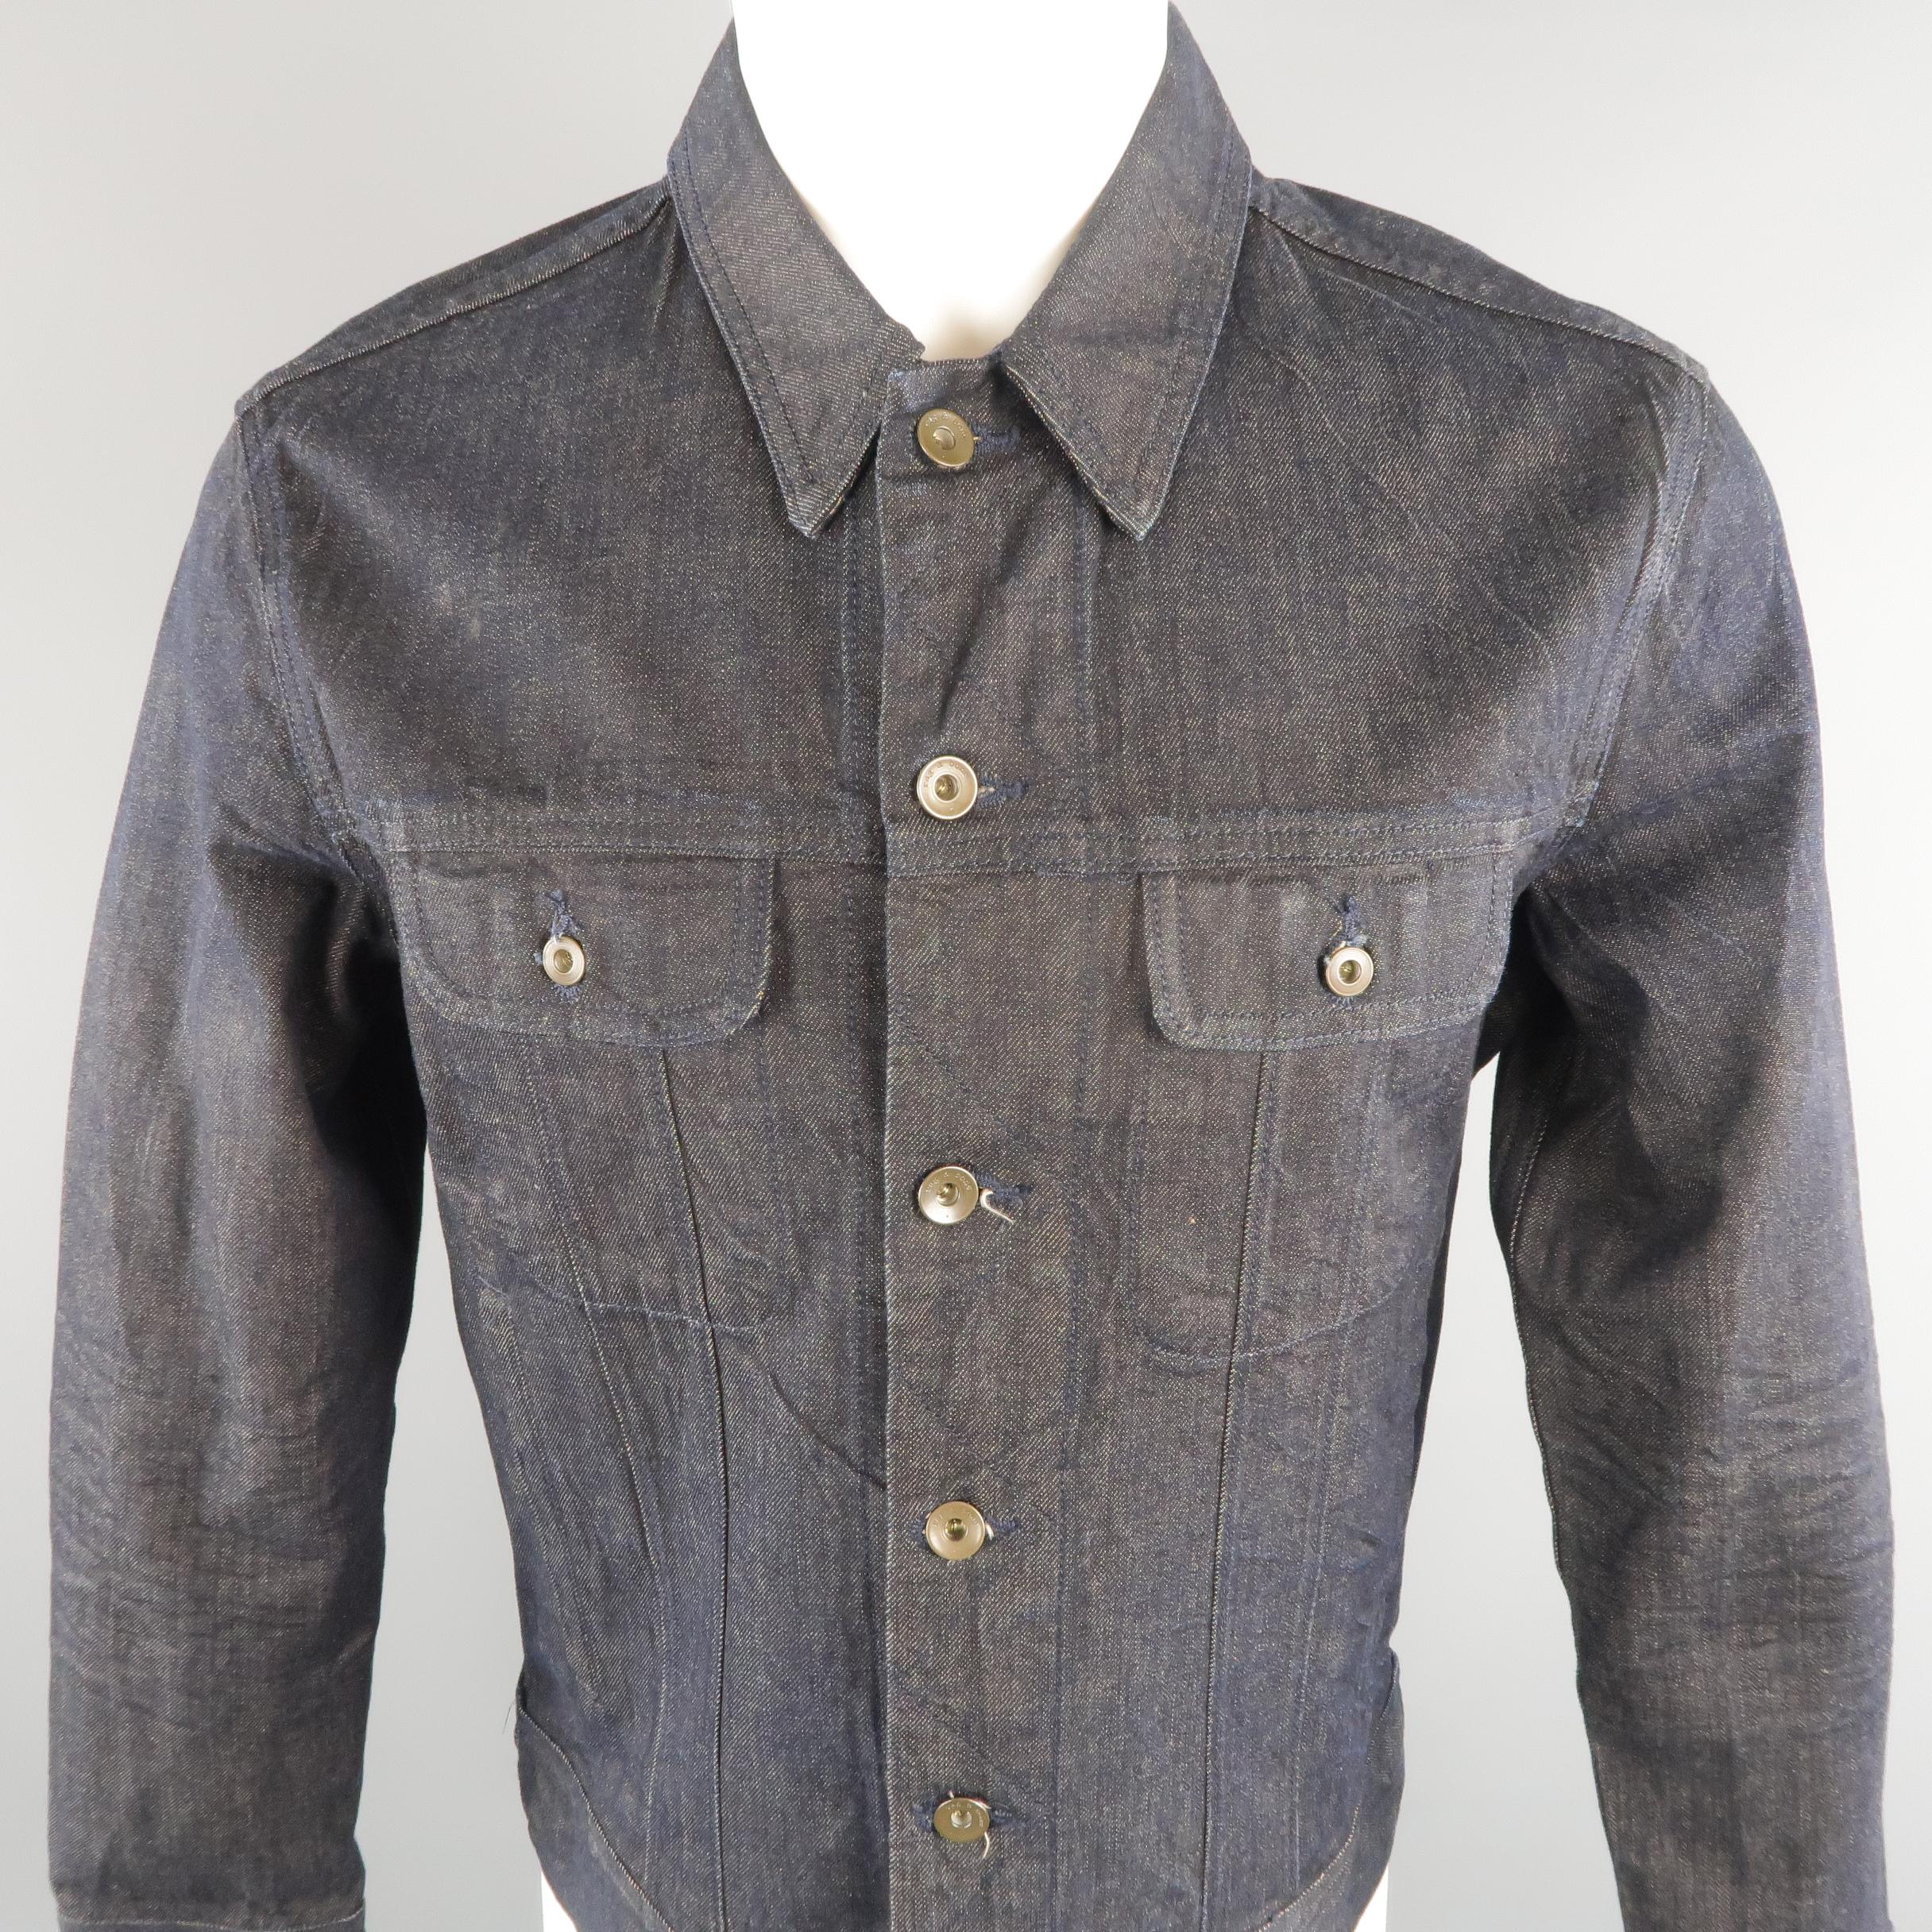 RAG & BONE trucker jacket come in indigo solid denim, same tone stitches, patch flap  pockets and waist adjusters. Made in USA.
 
New with tags.
Marked: M
Measurements:
 
Shoulder: 18 in.
Chest: 42 in.
Sleeve: 26 in.
Length: 26 in.